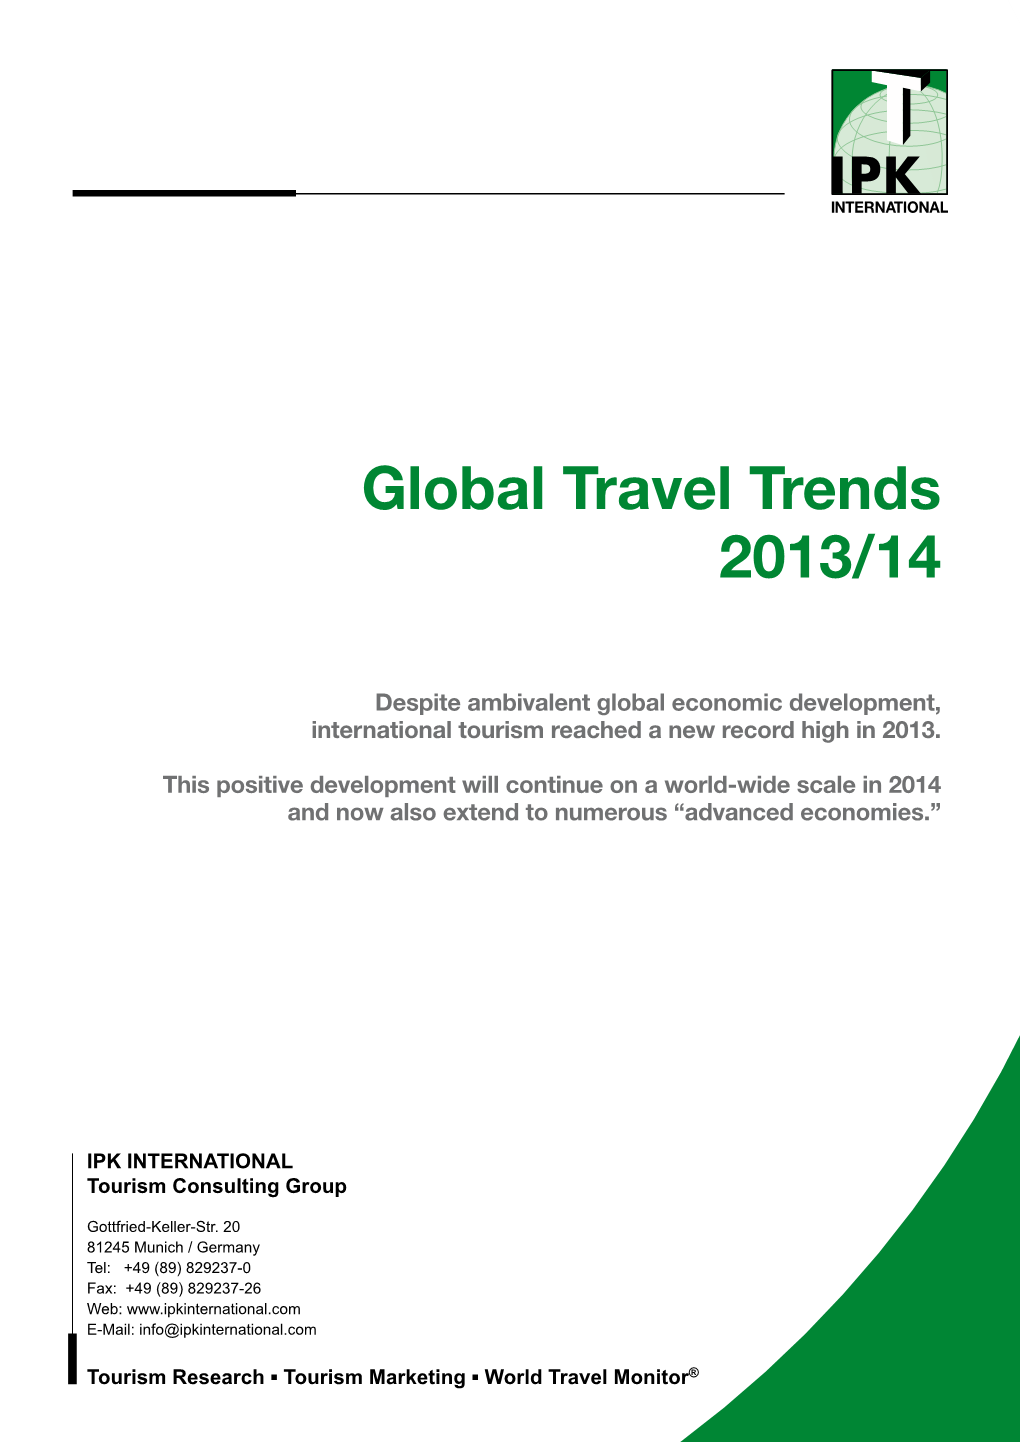 Global Travel Trends 2013/14